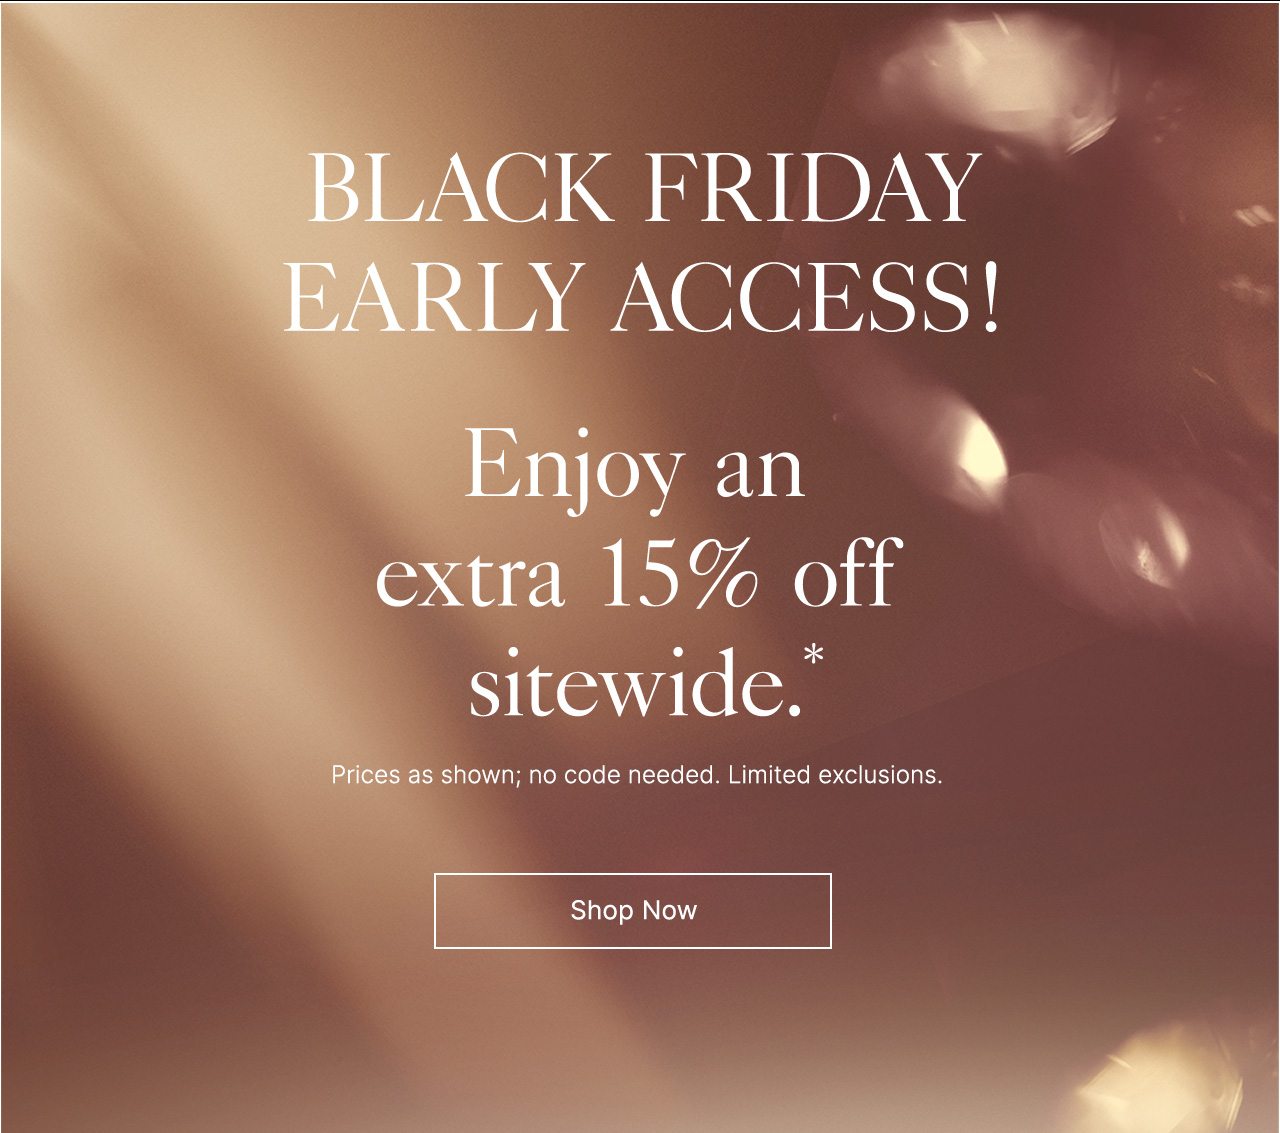 Black Friday Early Access Begins! Enjoy an extra 15% off sitewide.